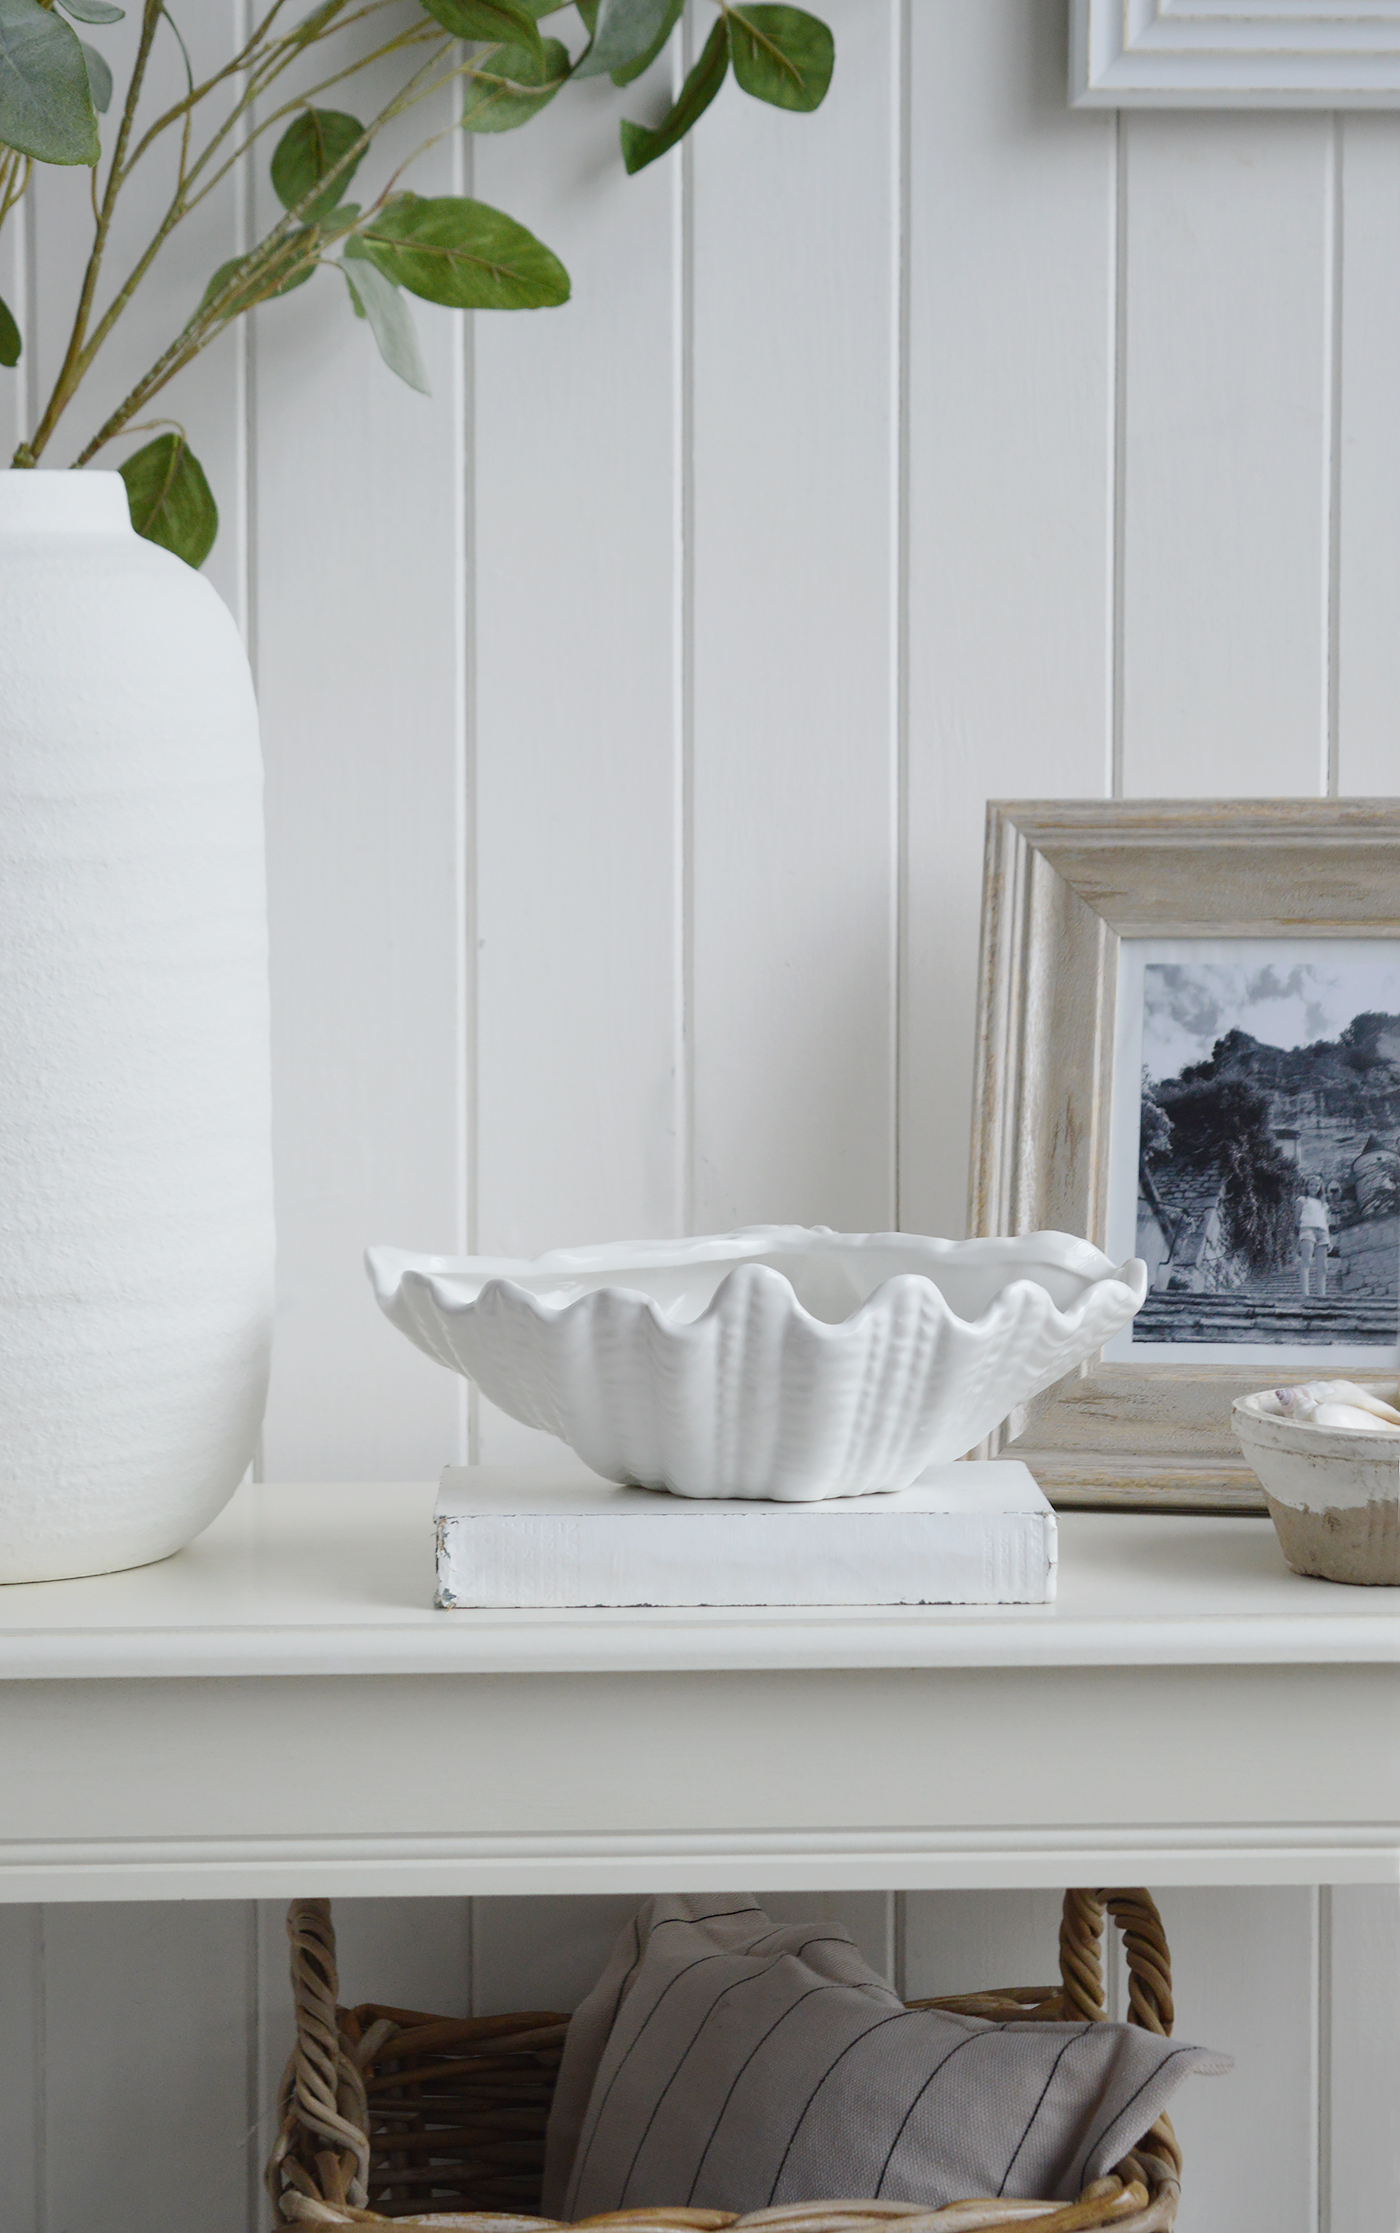 White Ceramic Clam Dish - Hamptons Coastal Console Table Styling and Decor in a white interior